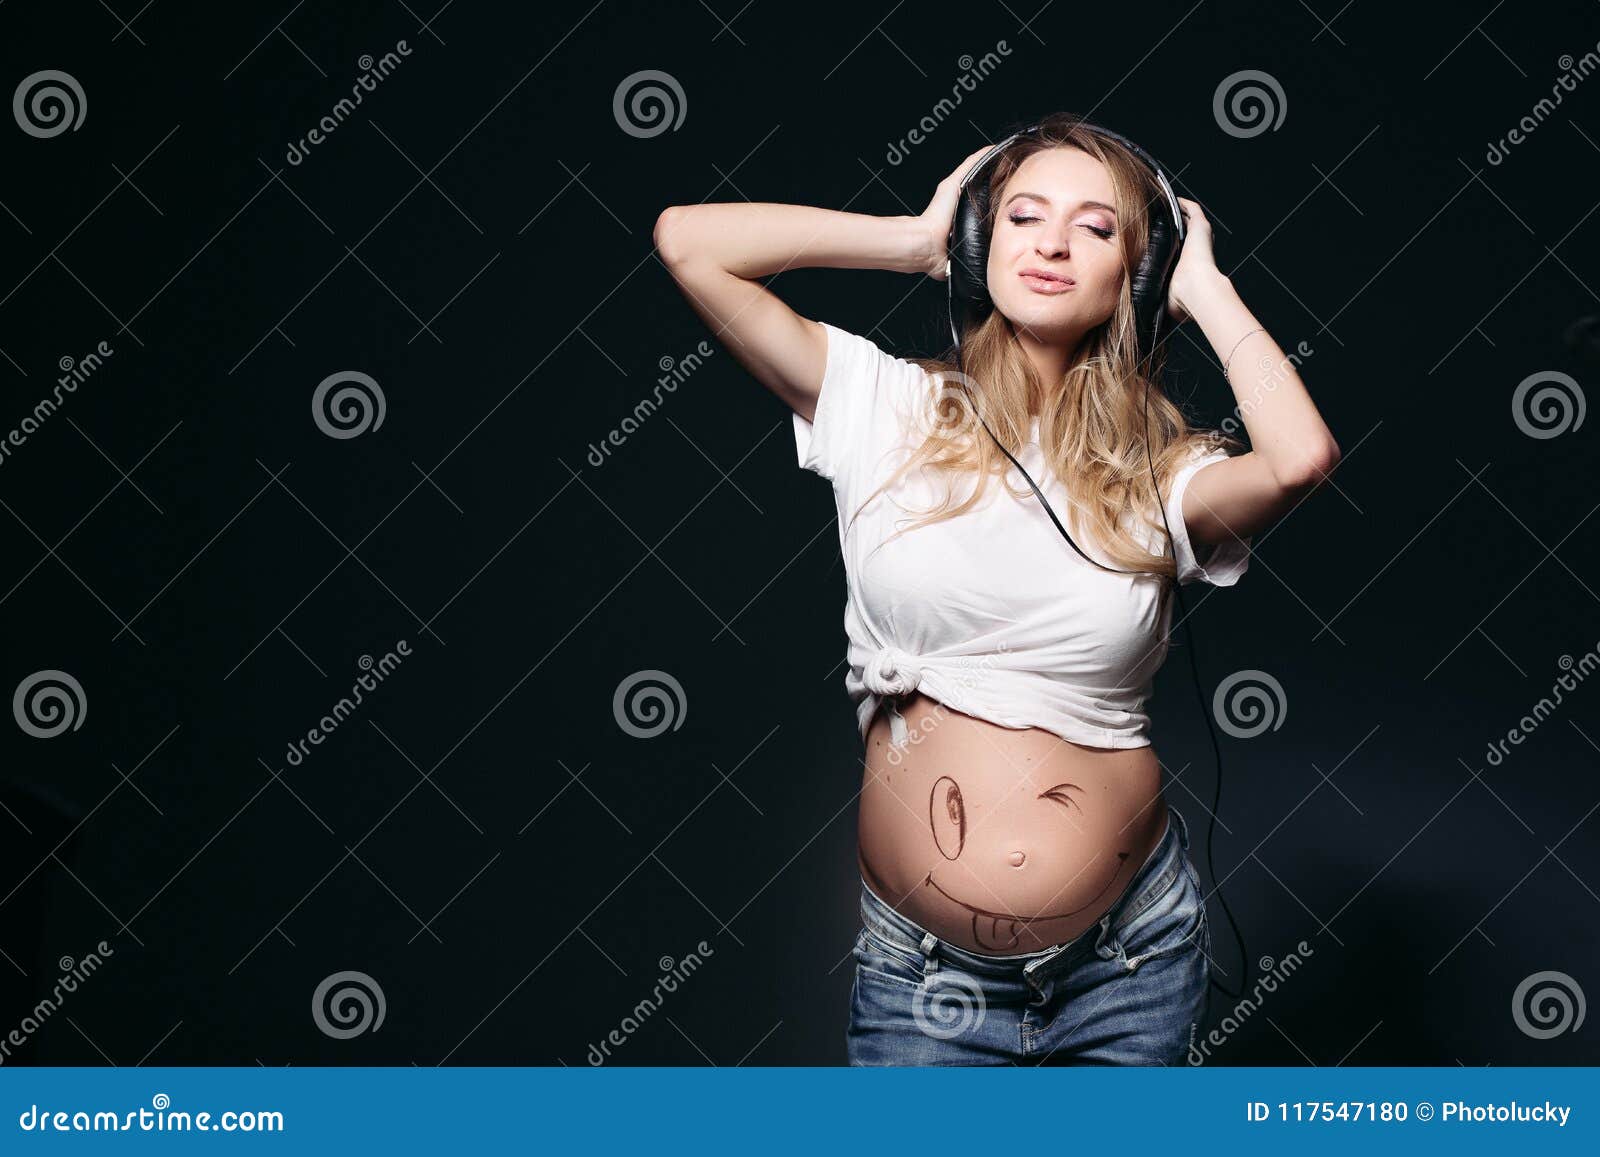 Pregnant Woman Dancing And Smiling With Closed Eyes. Stock ...